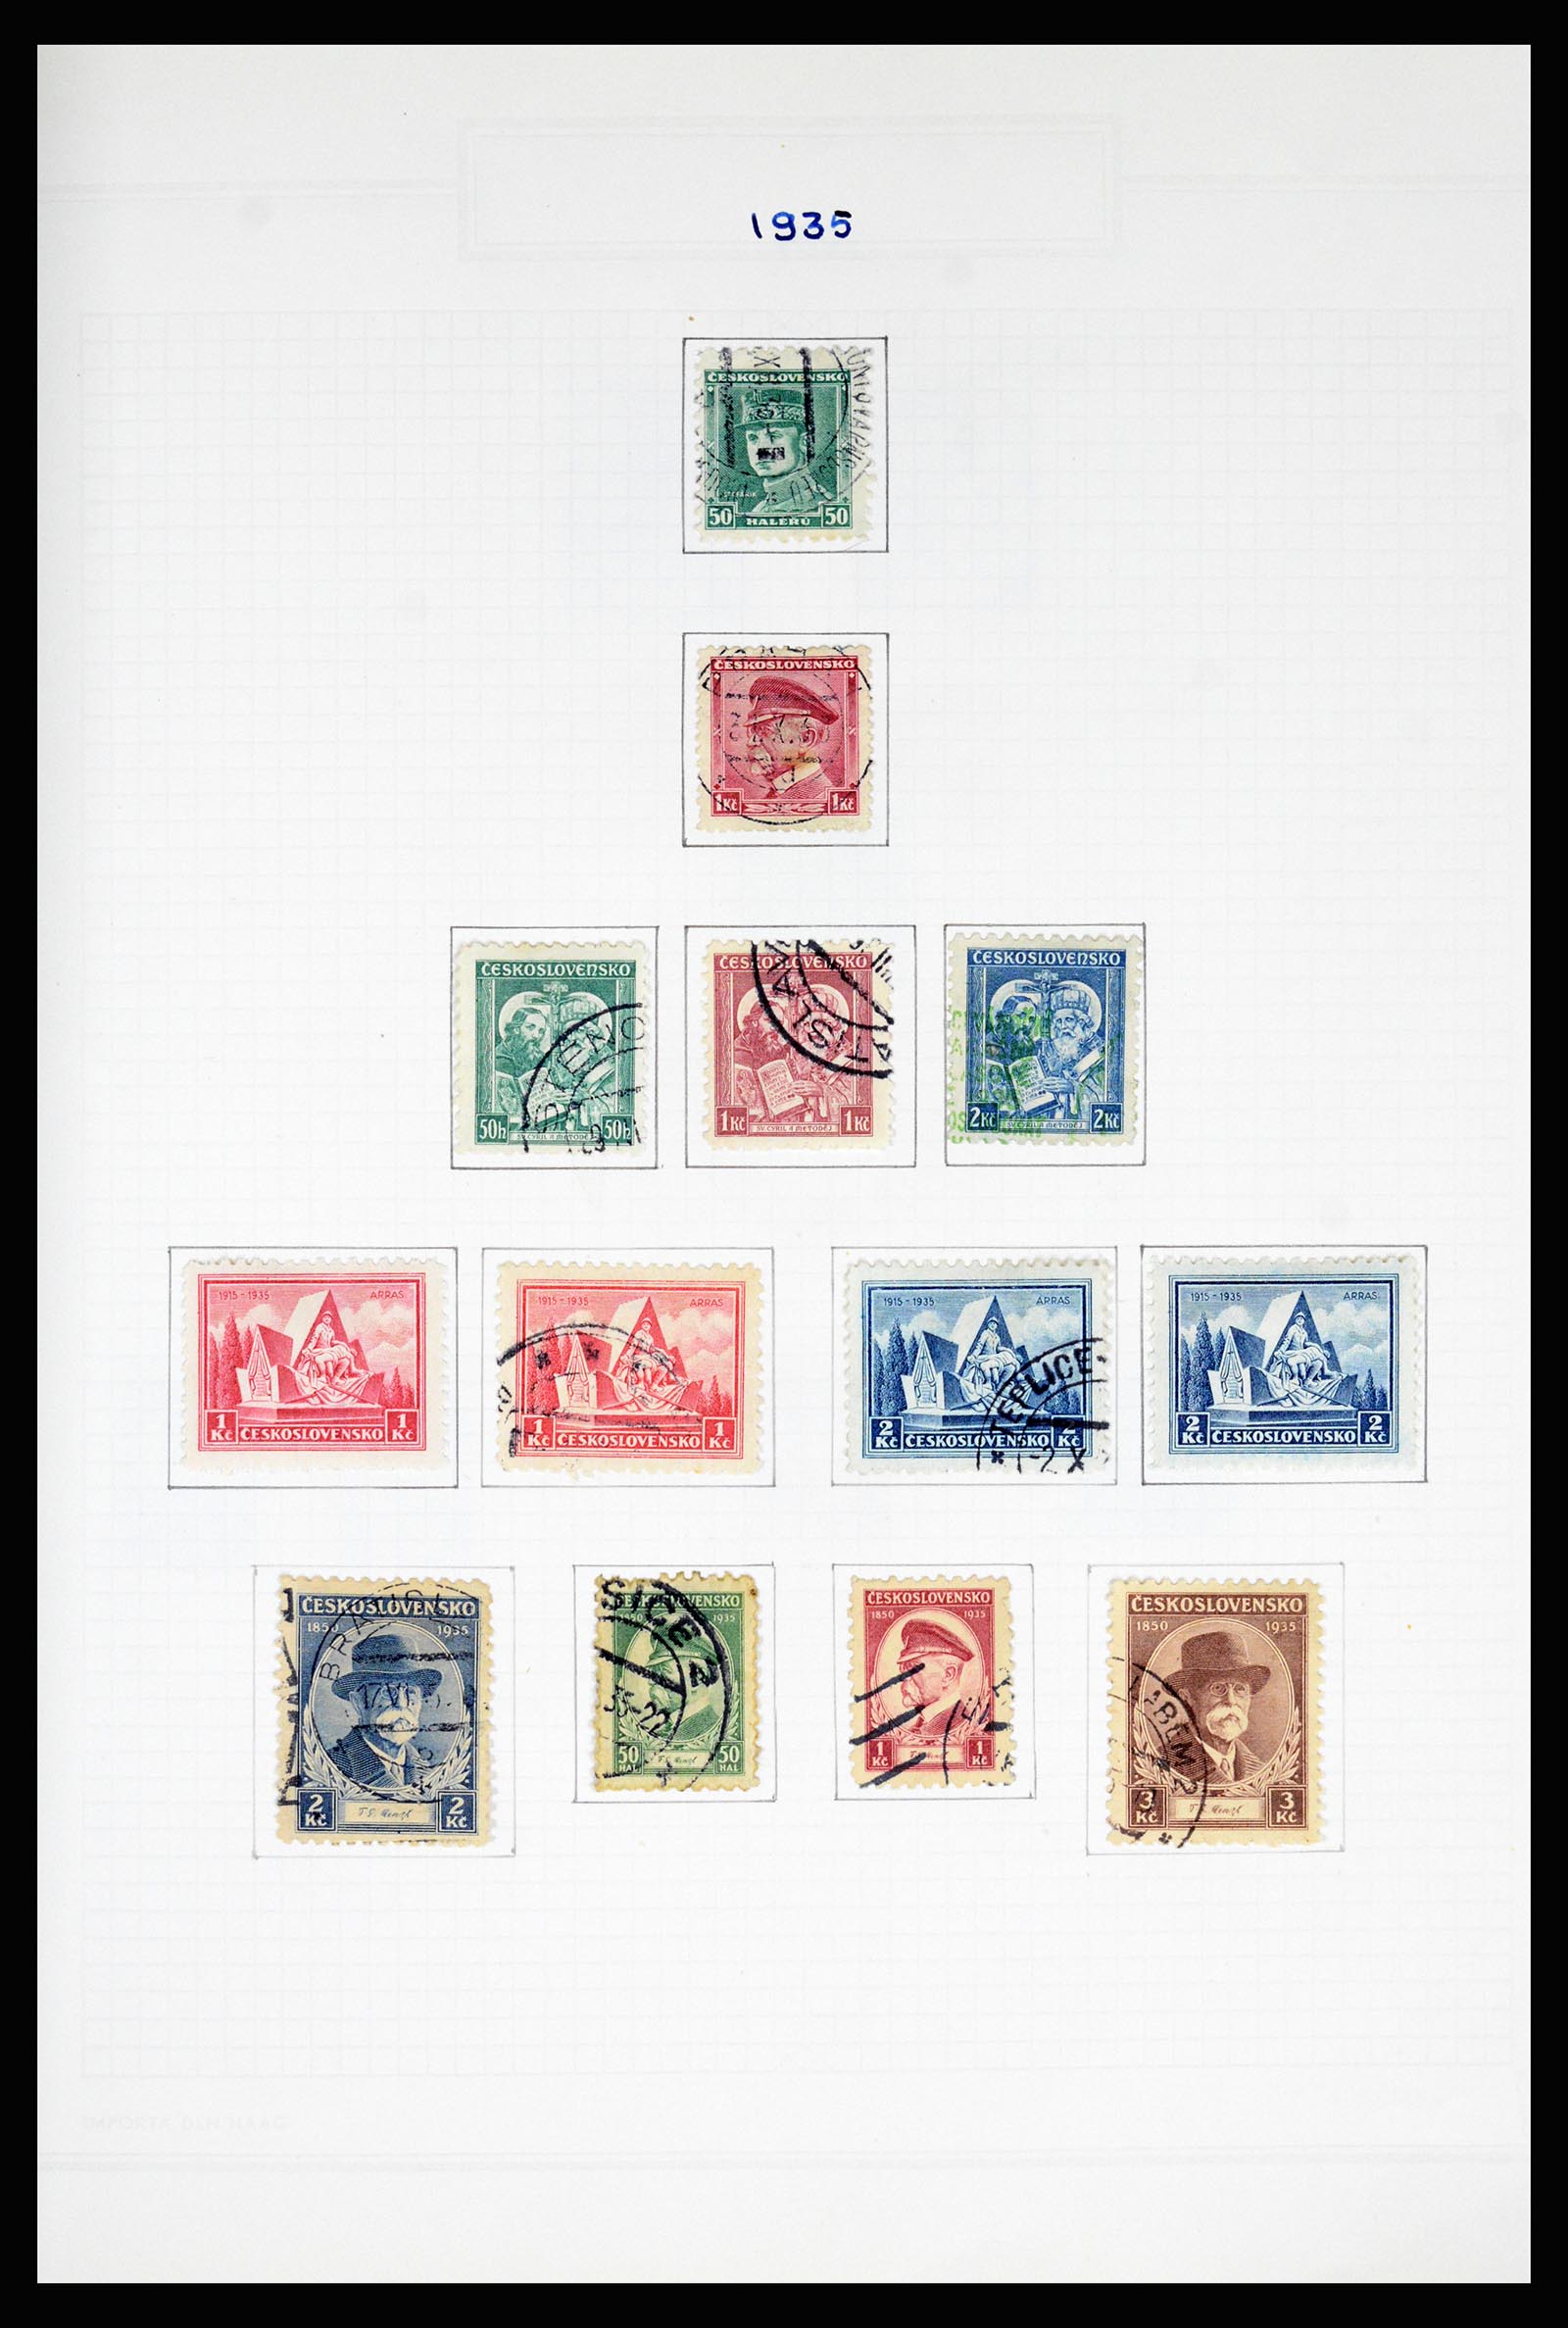 37096 037 - Stamp collection 37096 Czechoslovakia 1918-2018.